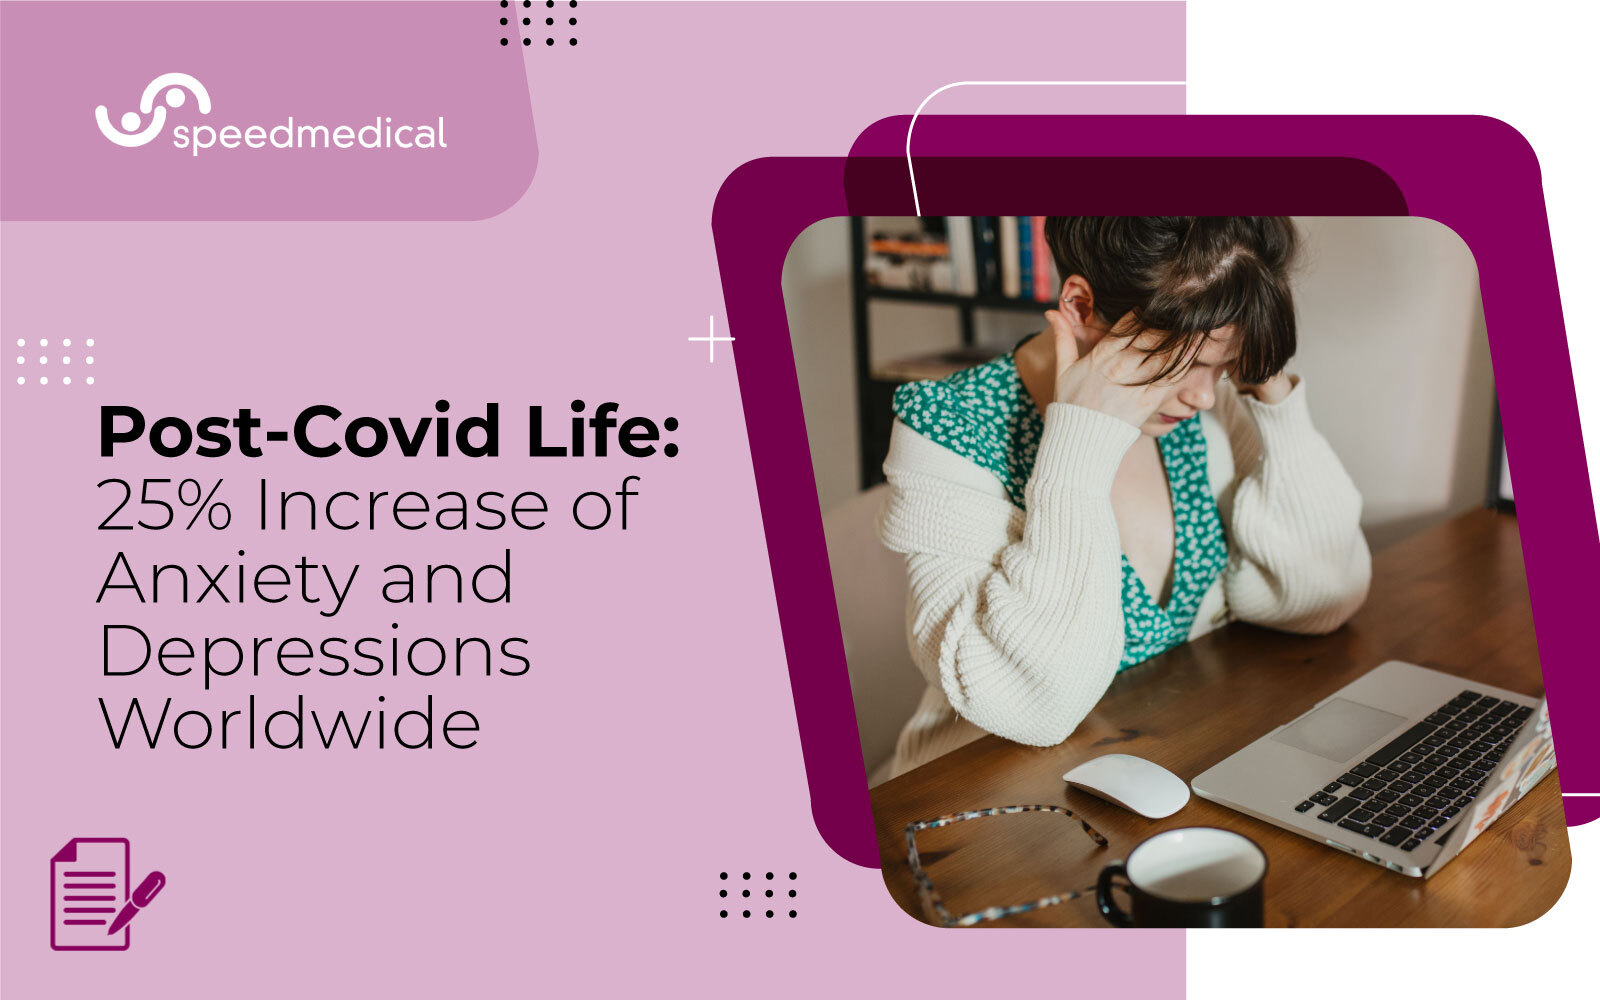 Post-Covid Life: 25% Increase of Anxiety and Depressions Worldwide